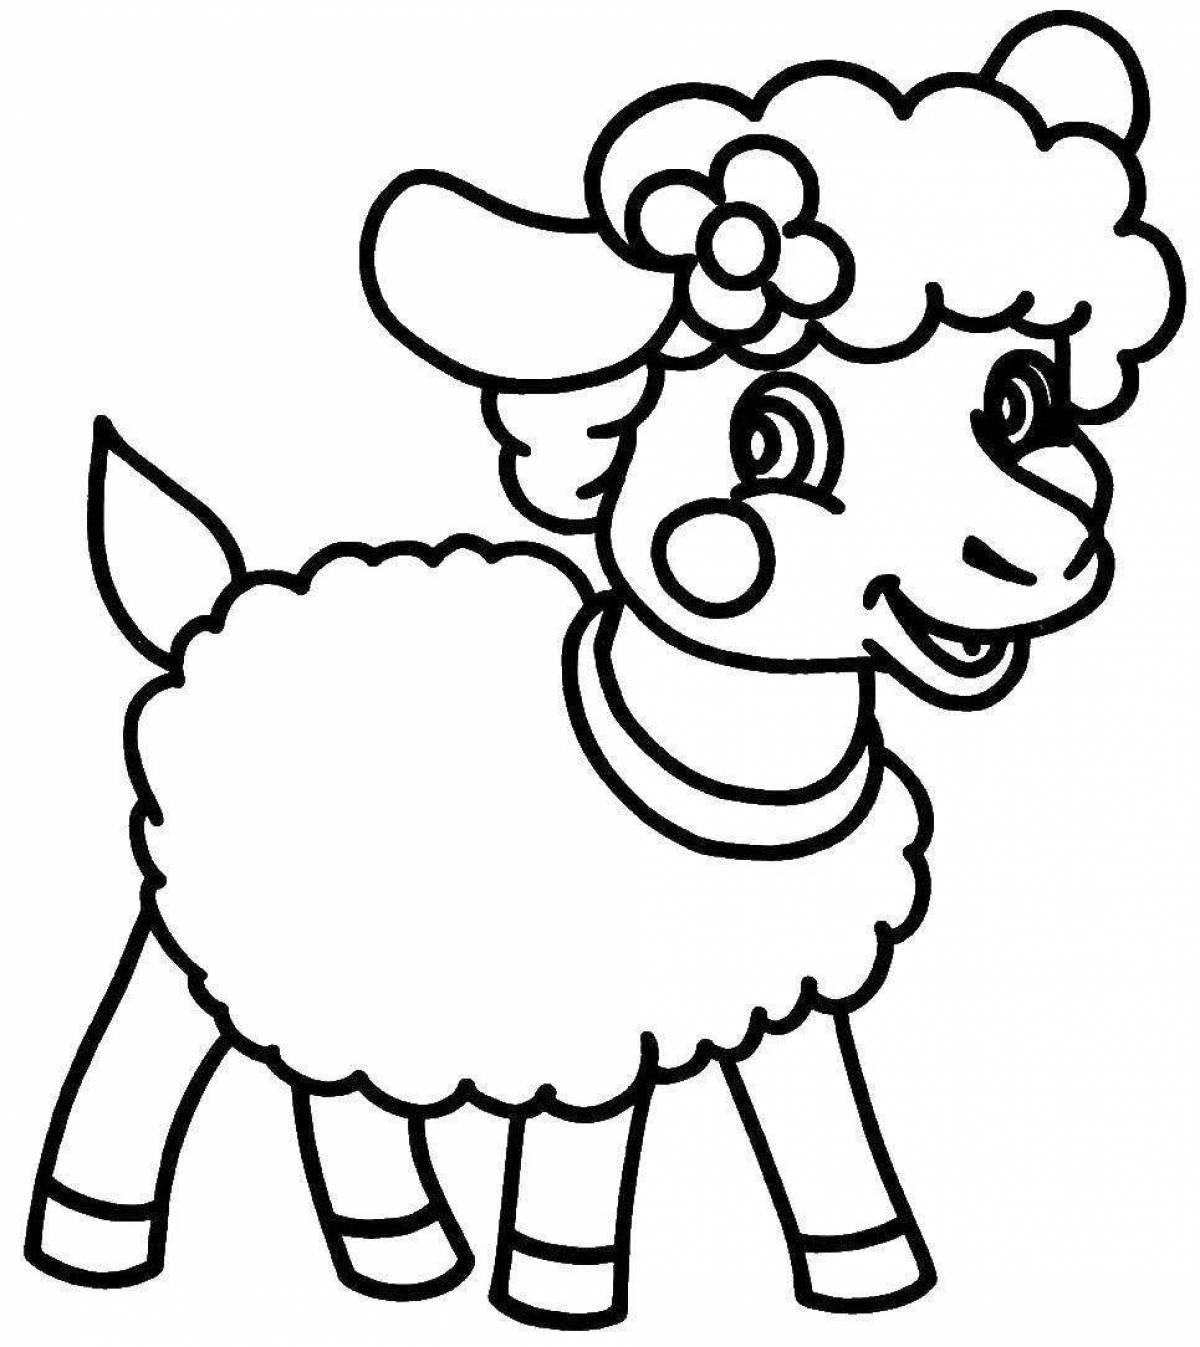 Adorable sheep coloring book for 5-6 year olds